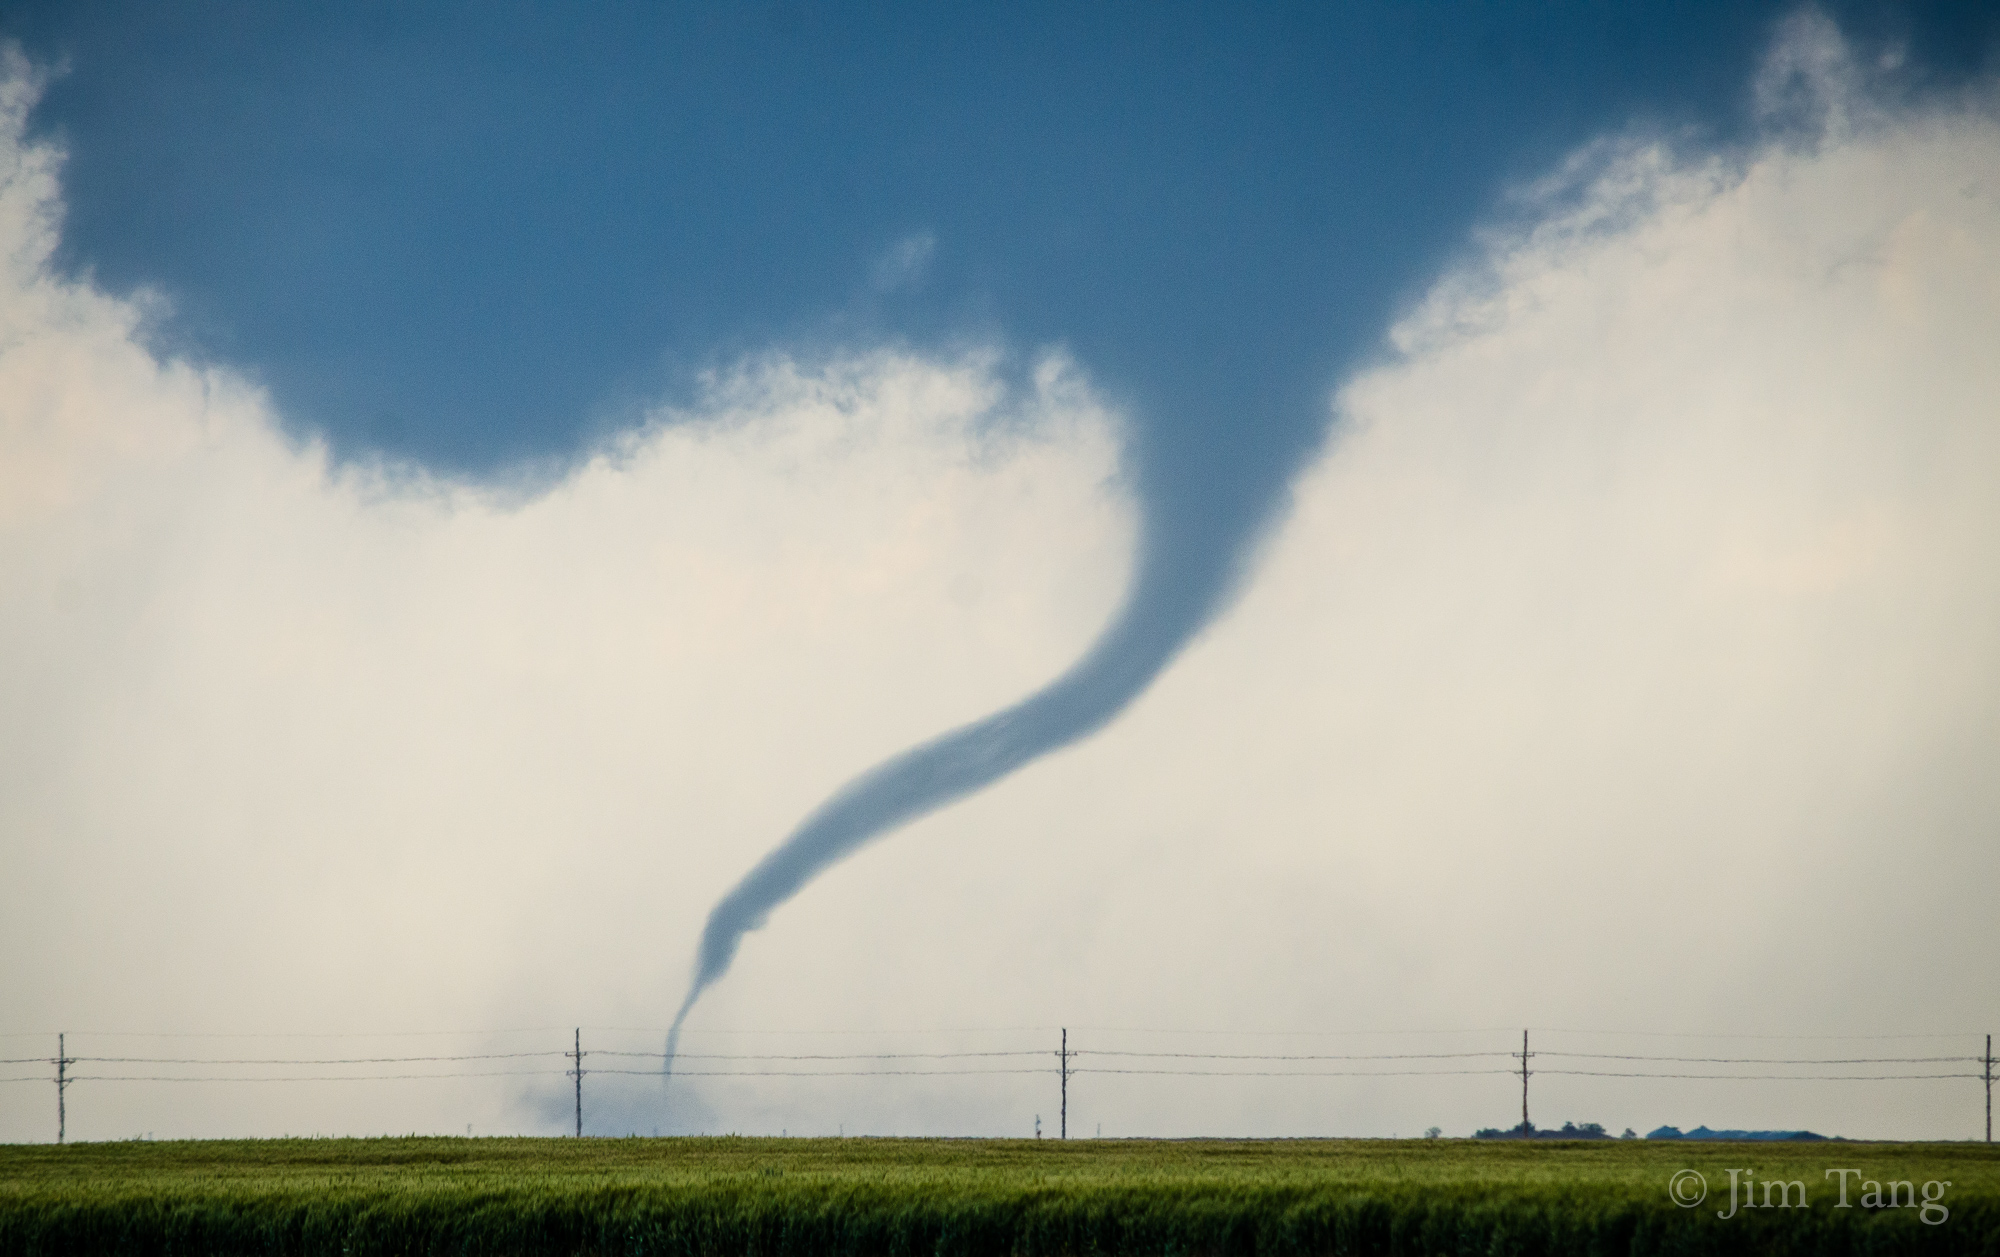 When is the best time of year to schedule a storm chasing vacation?